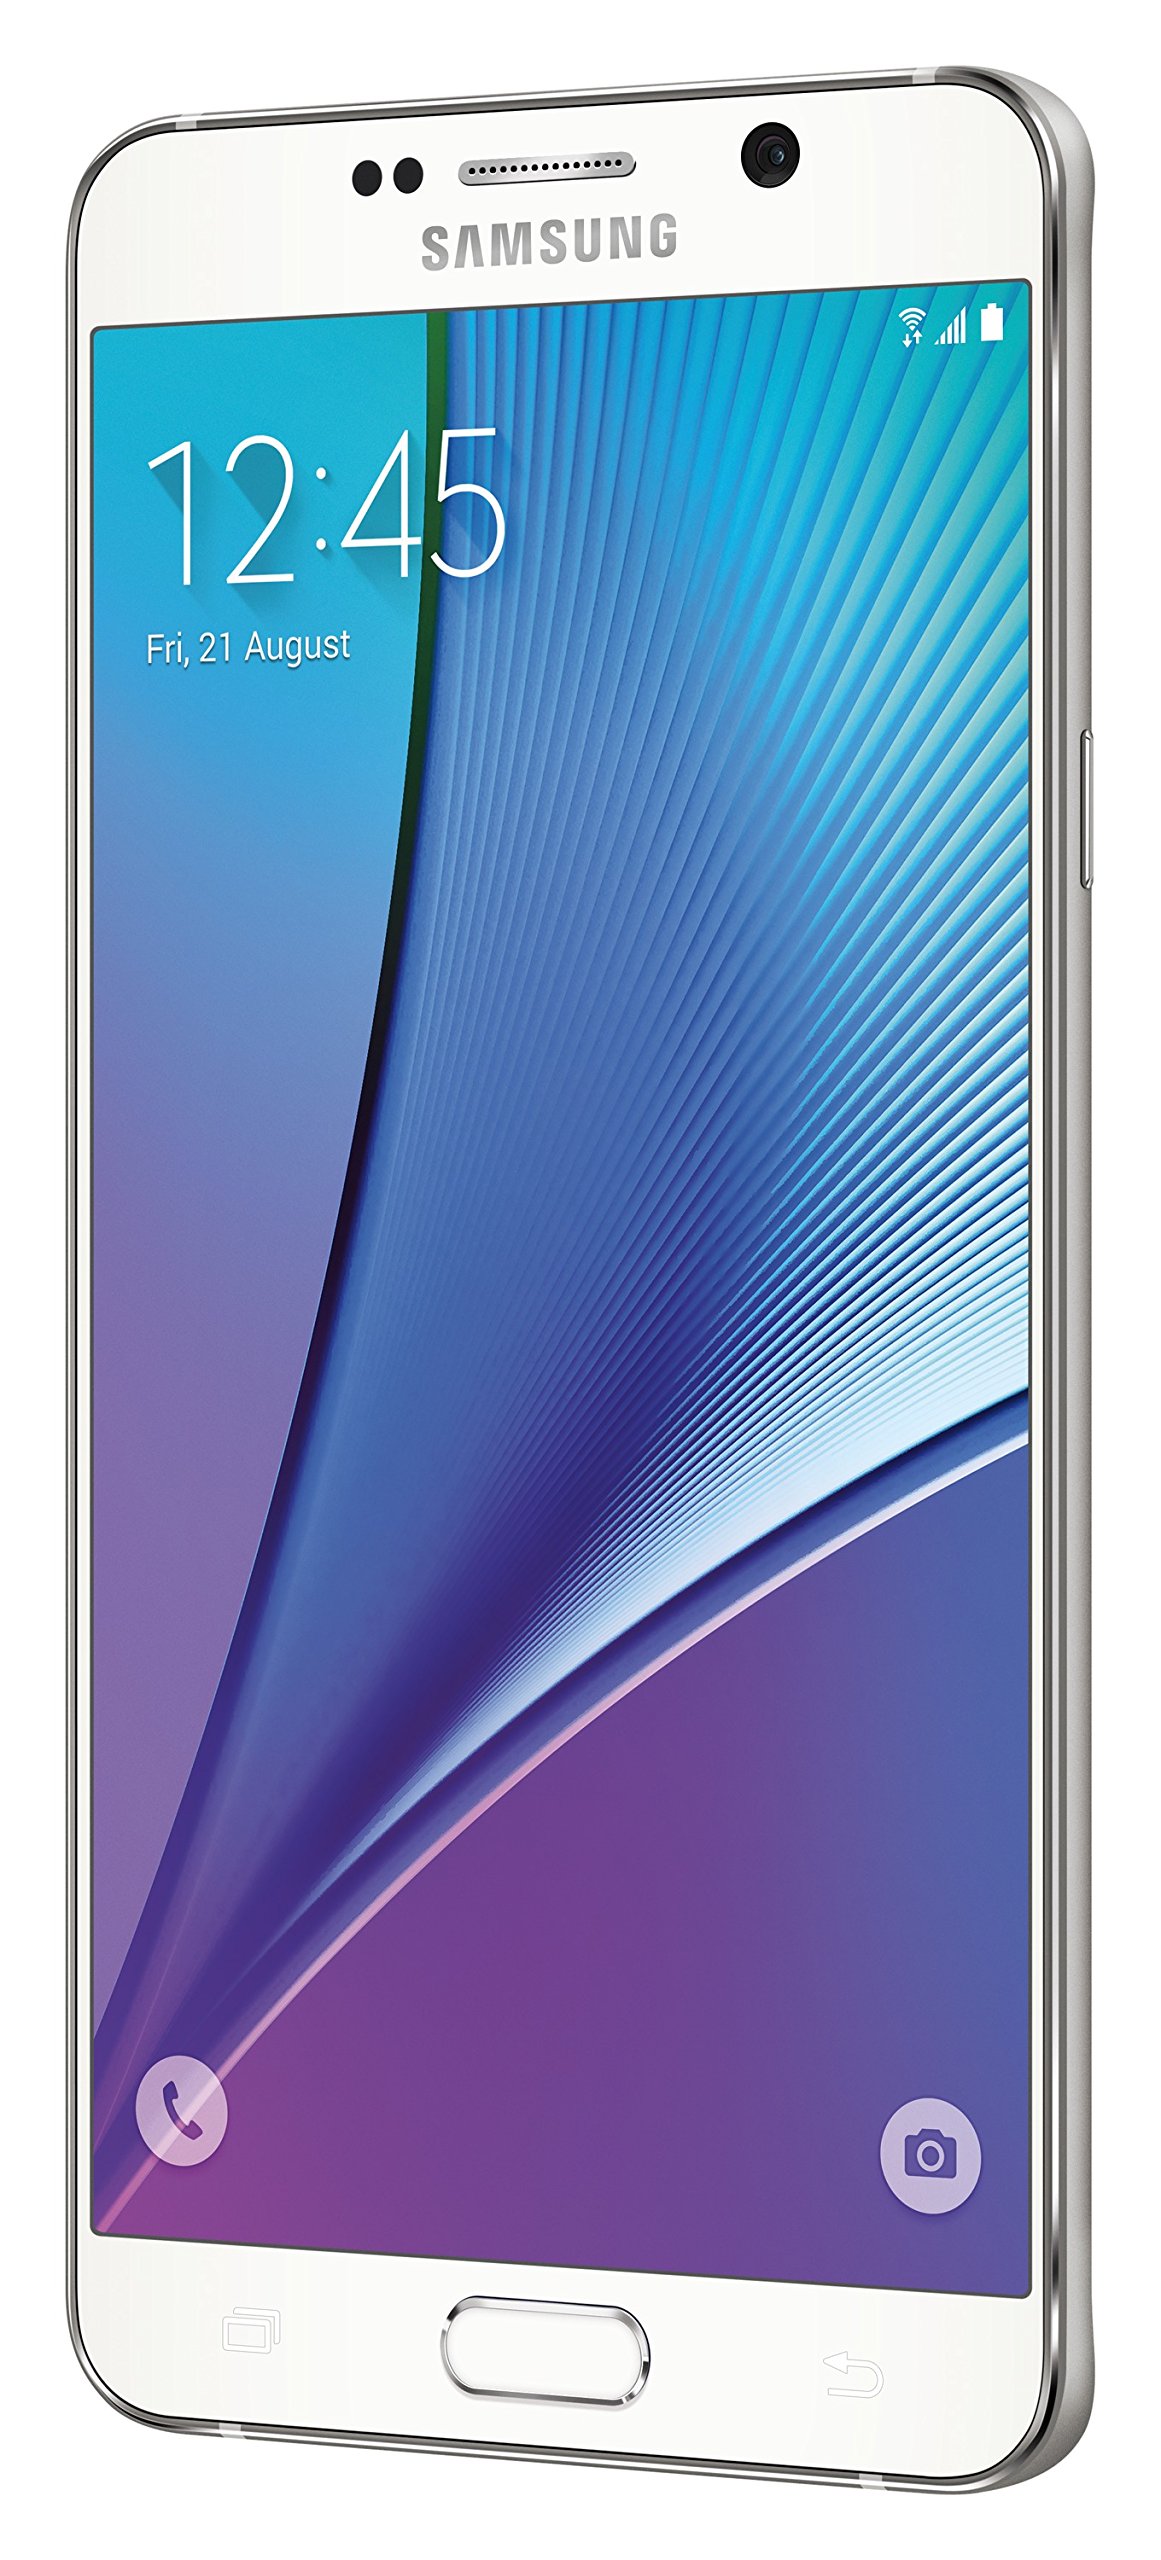 Samsung Galaxy Note 5, White  32GB (AT&T)